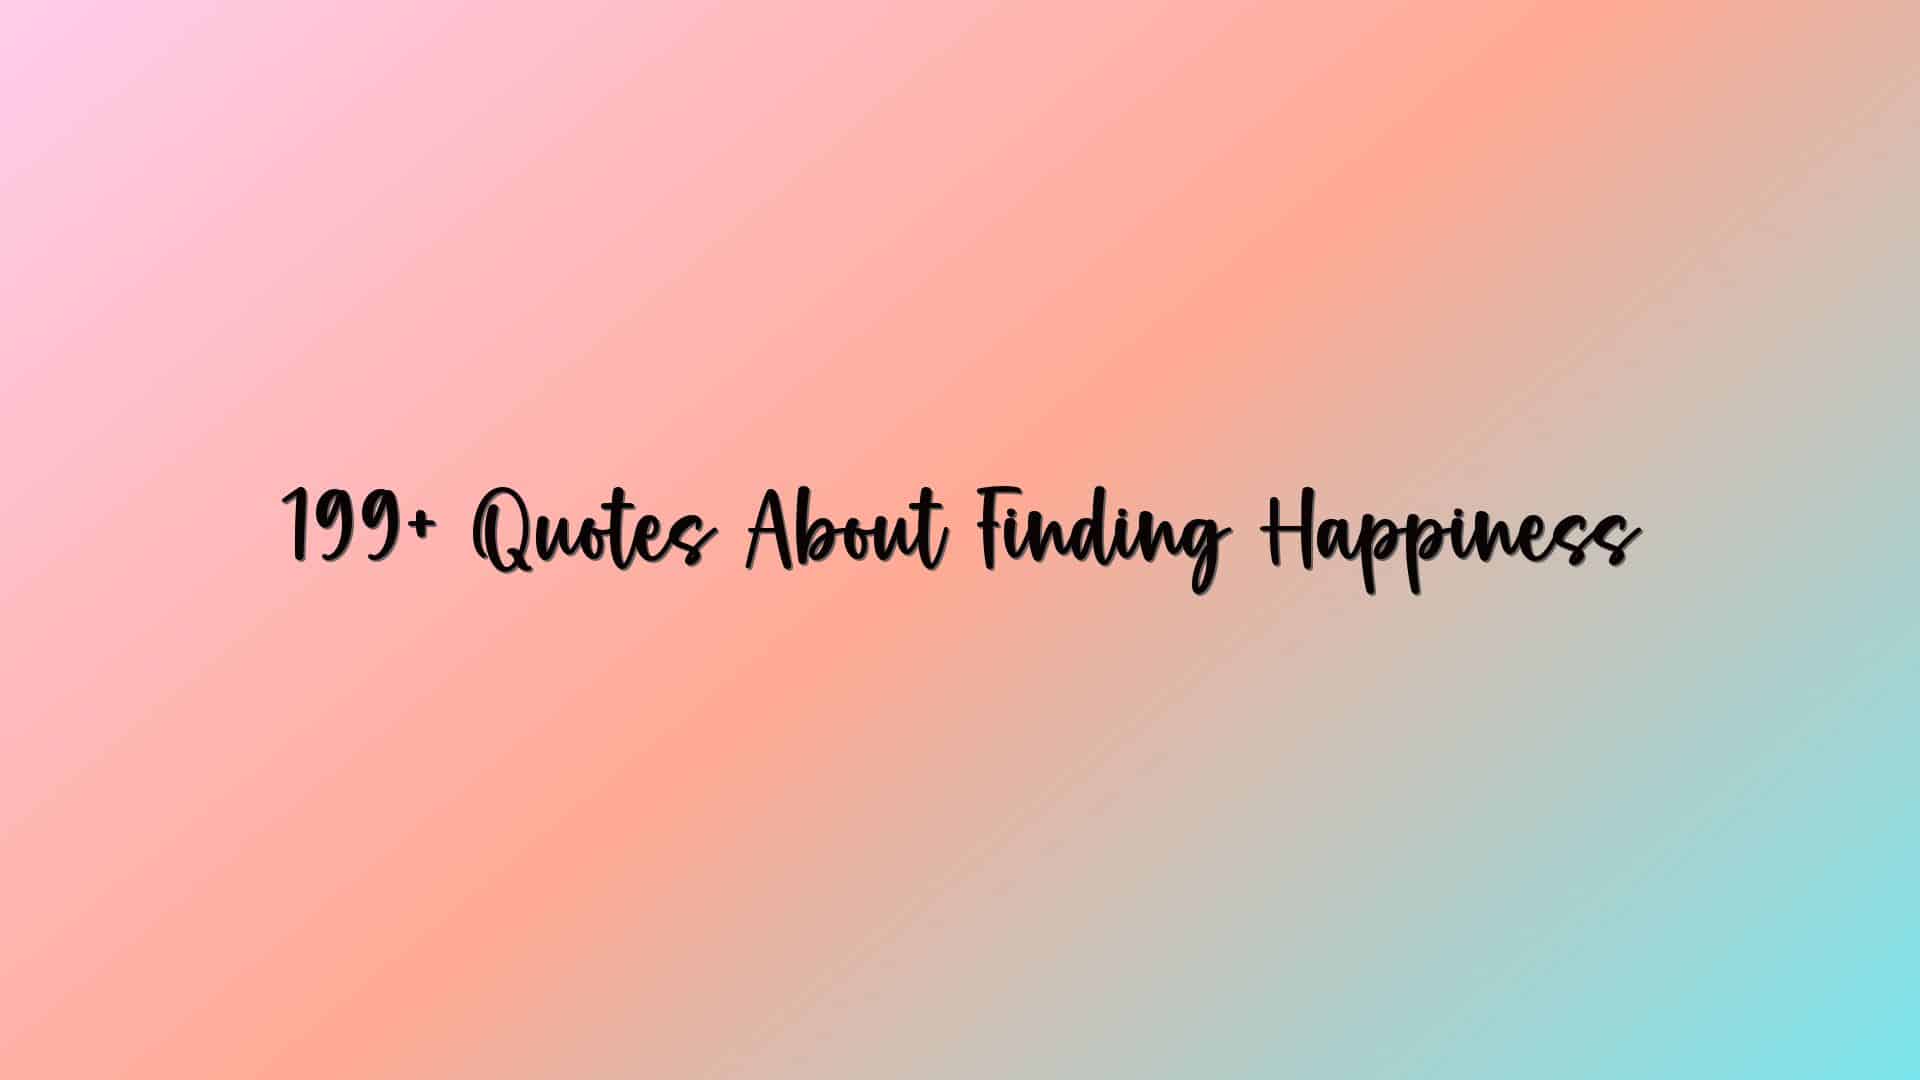 199+ Quotes About Finding Happiness